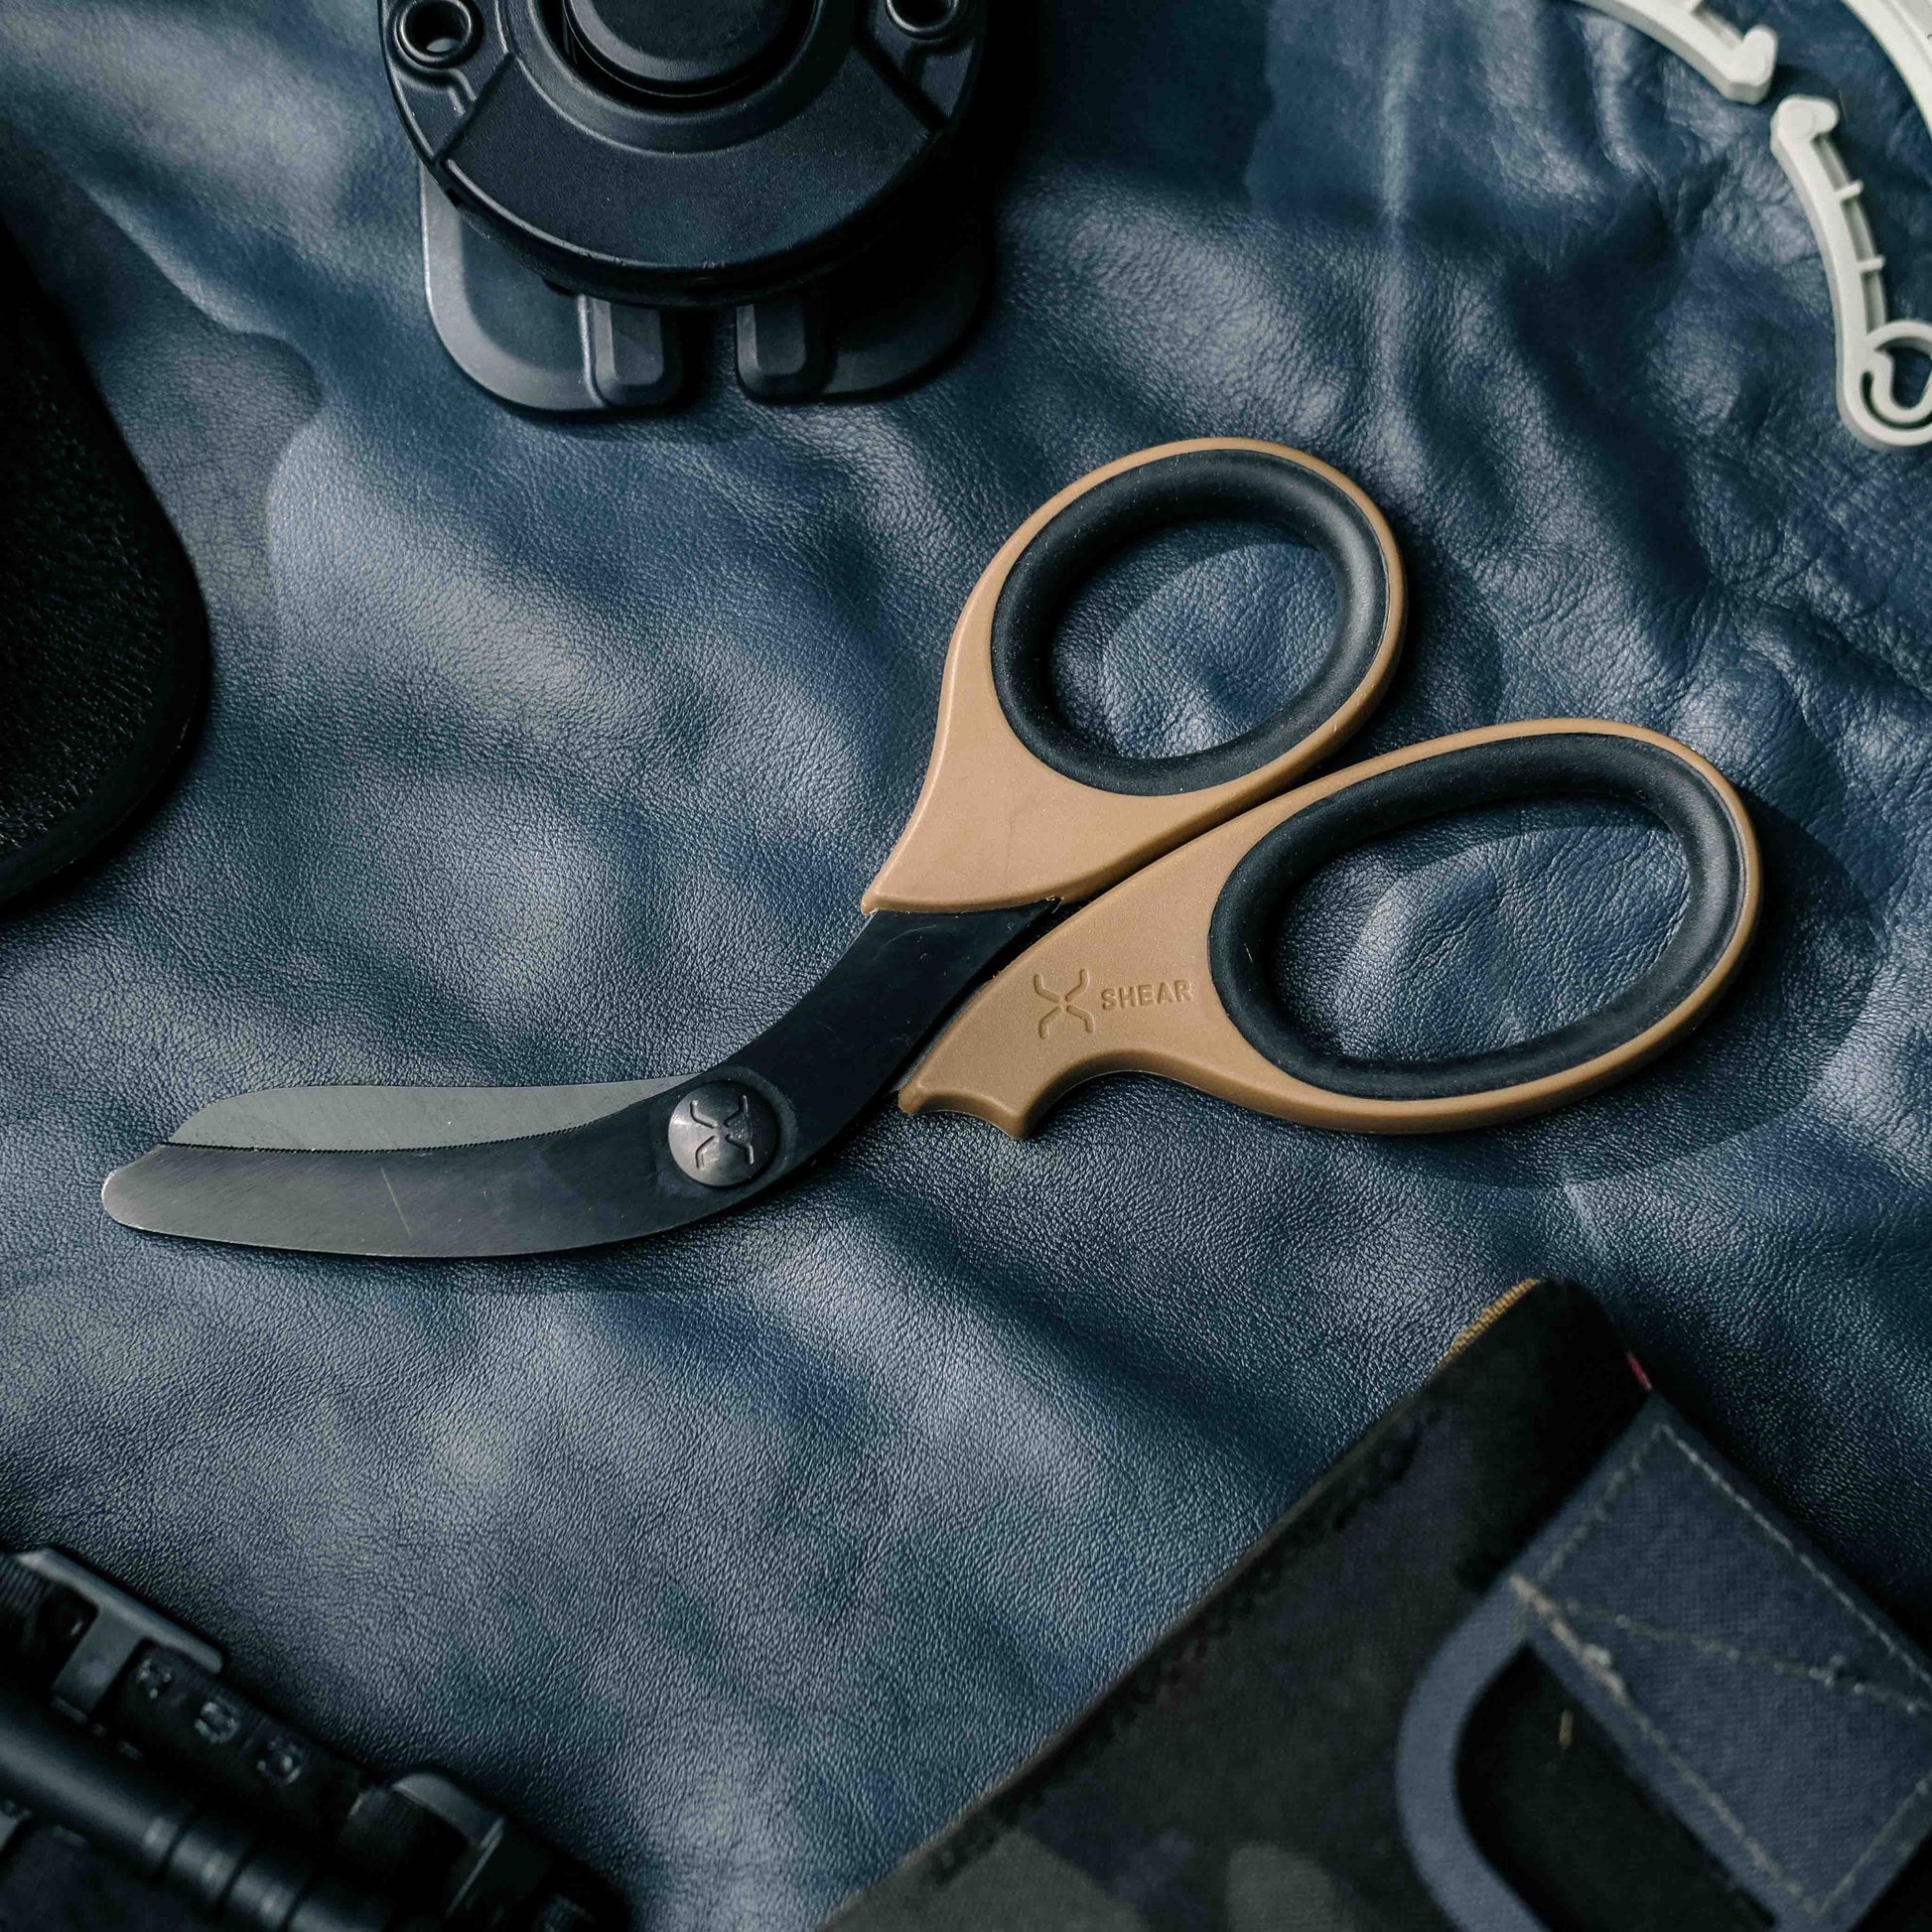 Chief Miller Shears XShear 7.5” Heavy Duty Trauma Shears. Coyote Brown & Black Handles, Black Titanium Coated Stainless Steel Blades, For Professional Emergency Providers Apparel